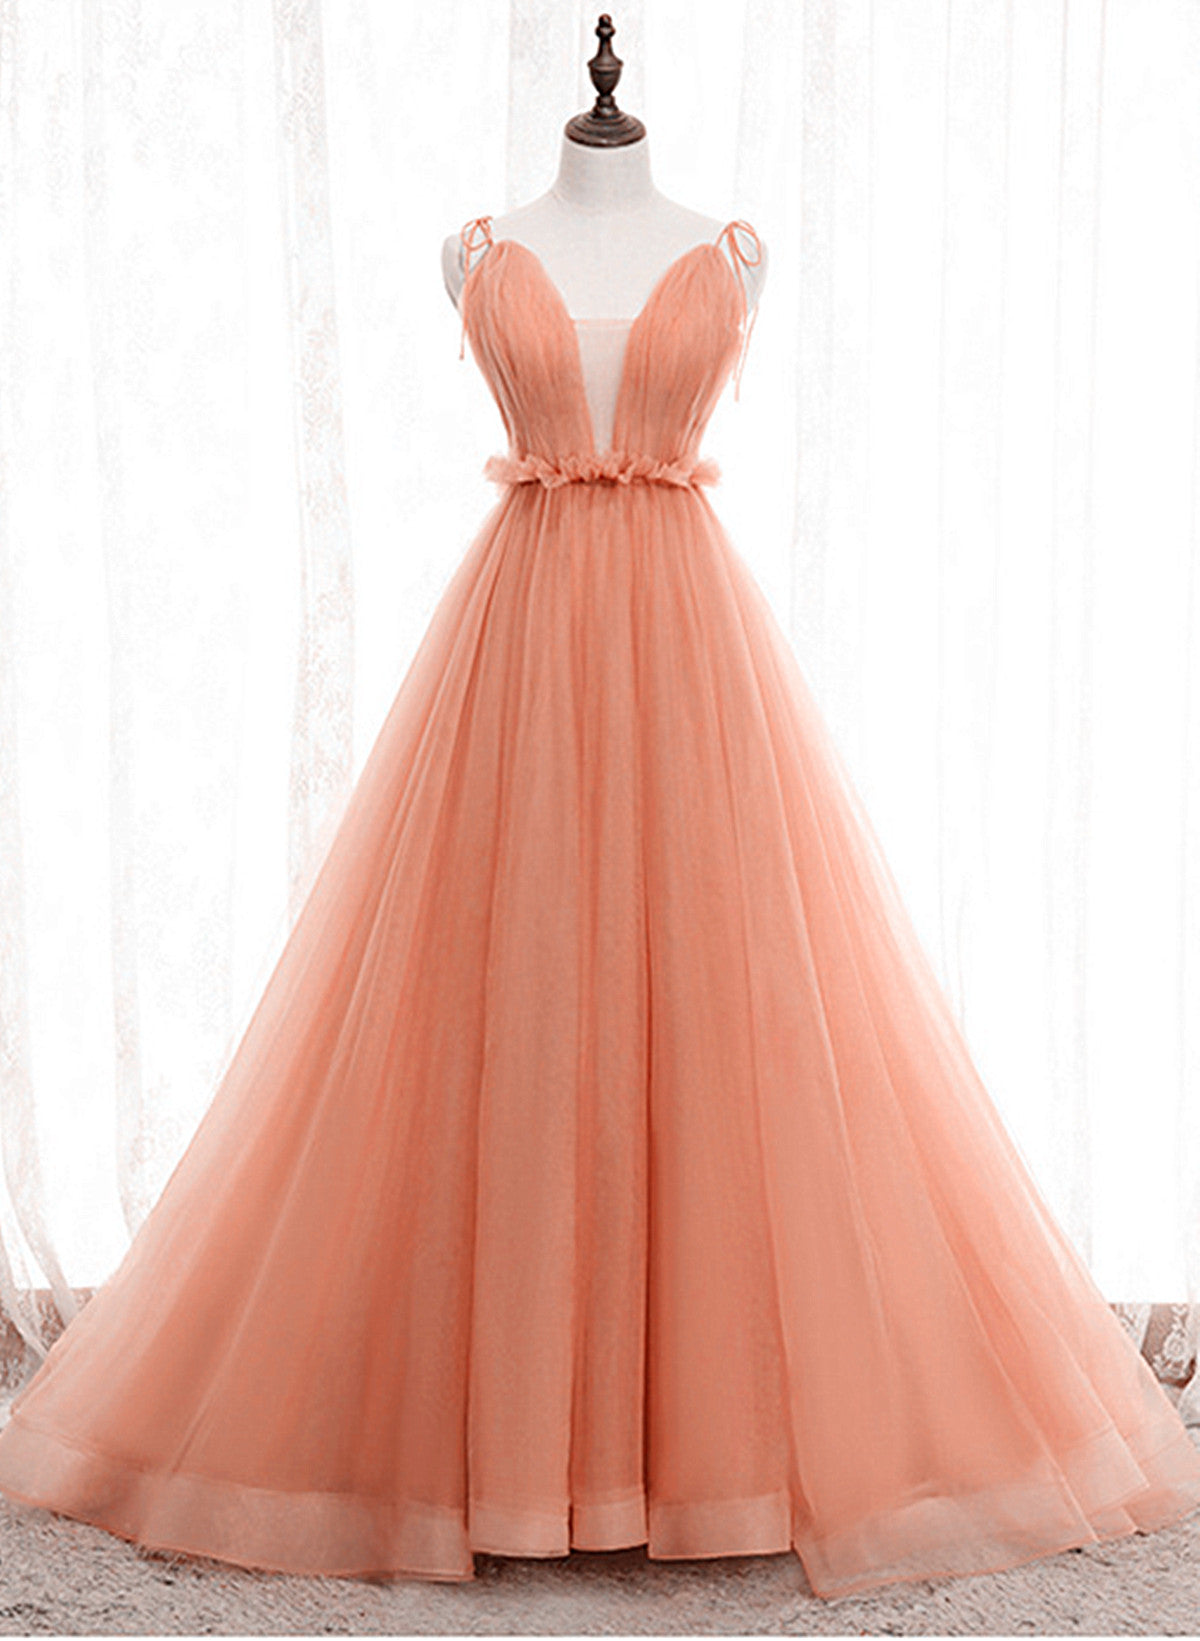 Wed Dresses Vintage, A-line Tulle Straps Low Back Long Wedding Party Dress, Pink Tulle Long Prom Dress